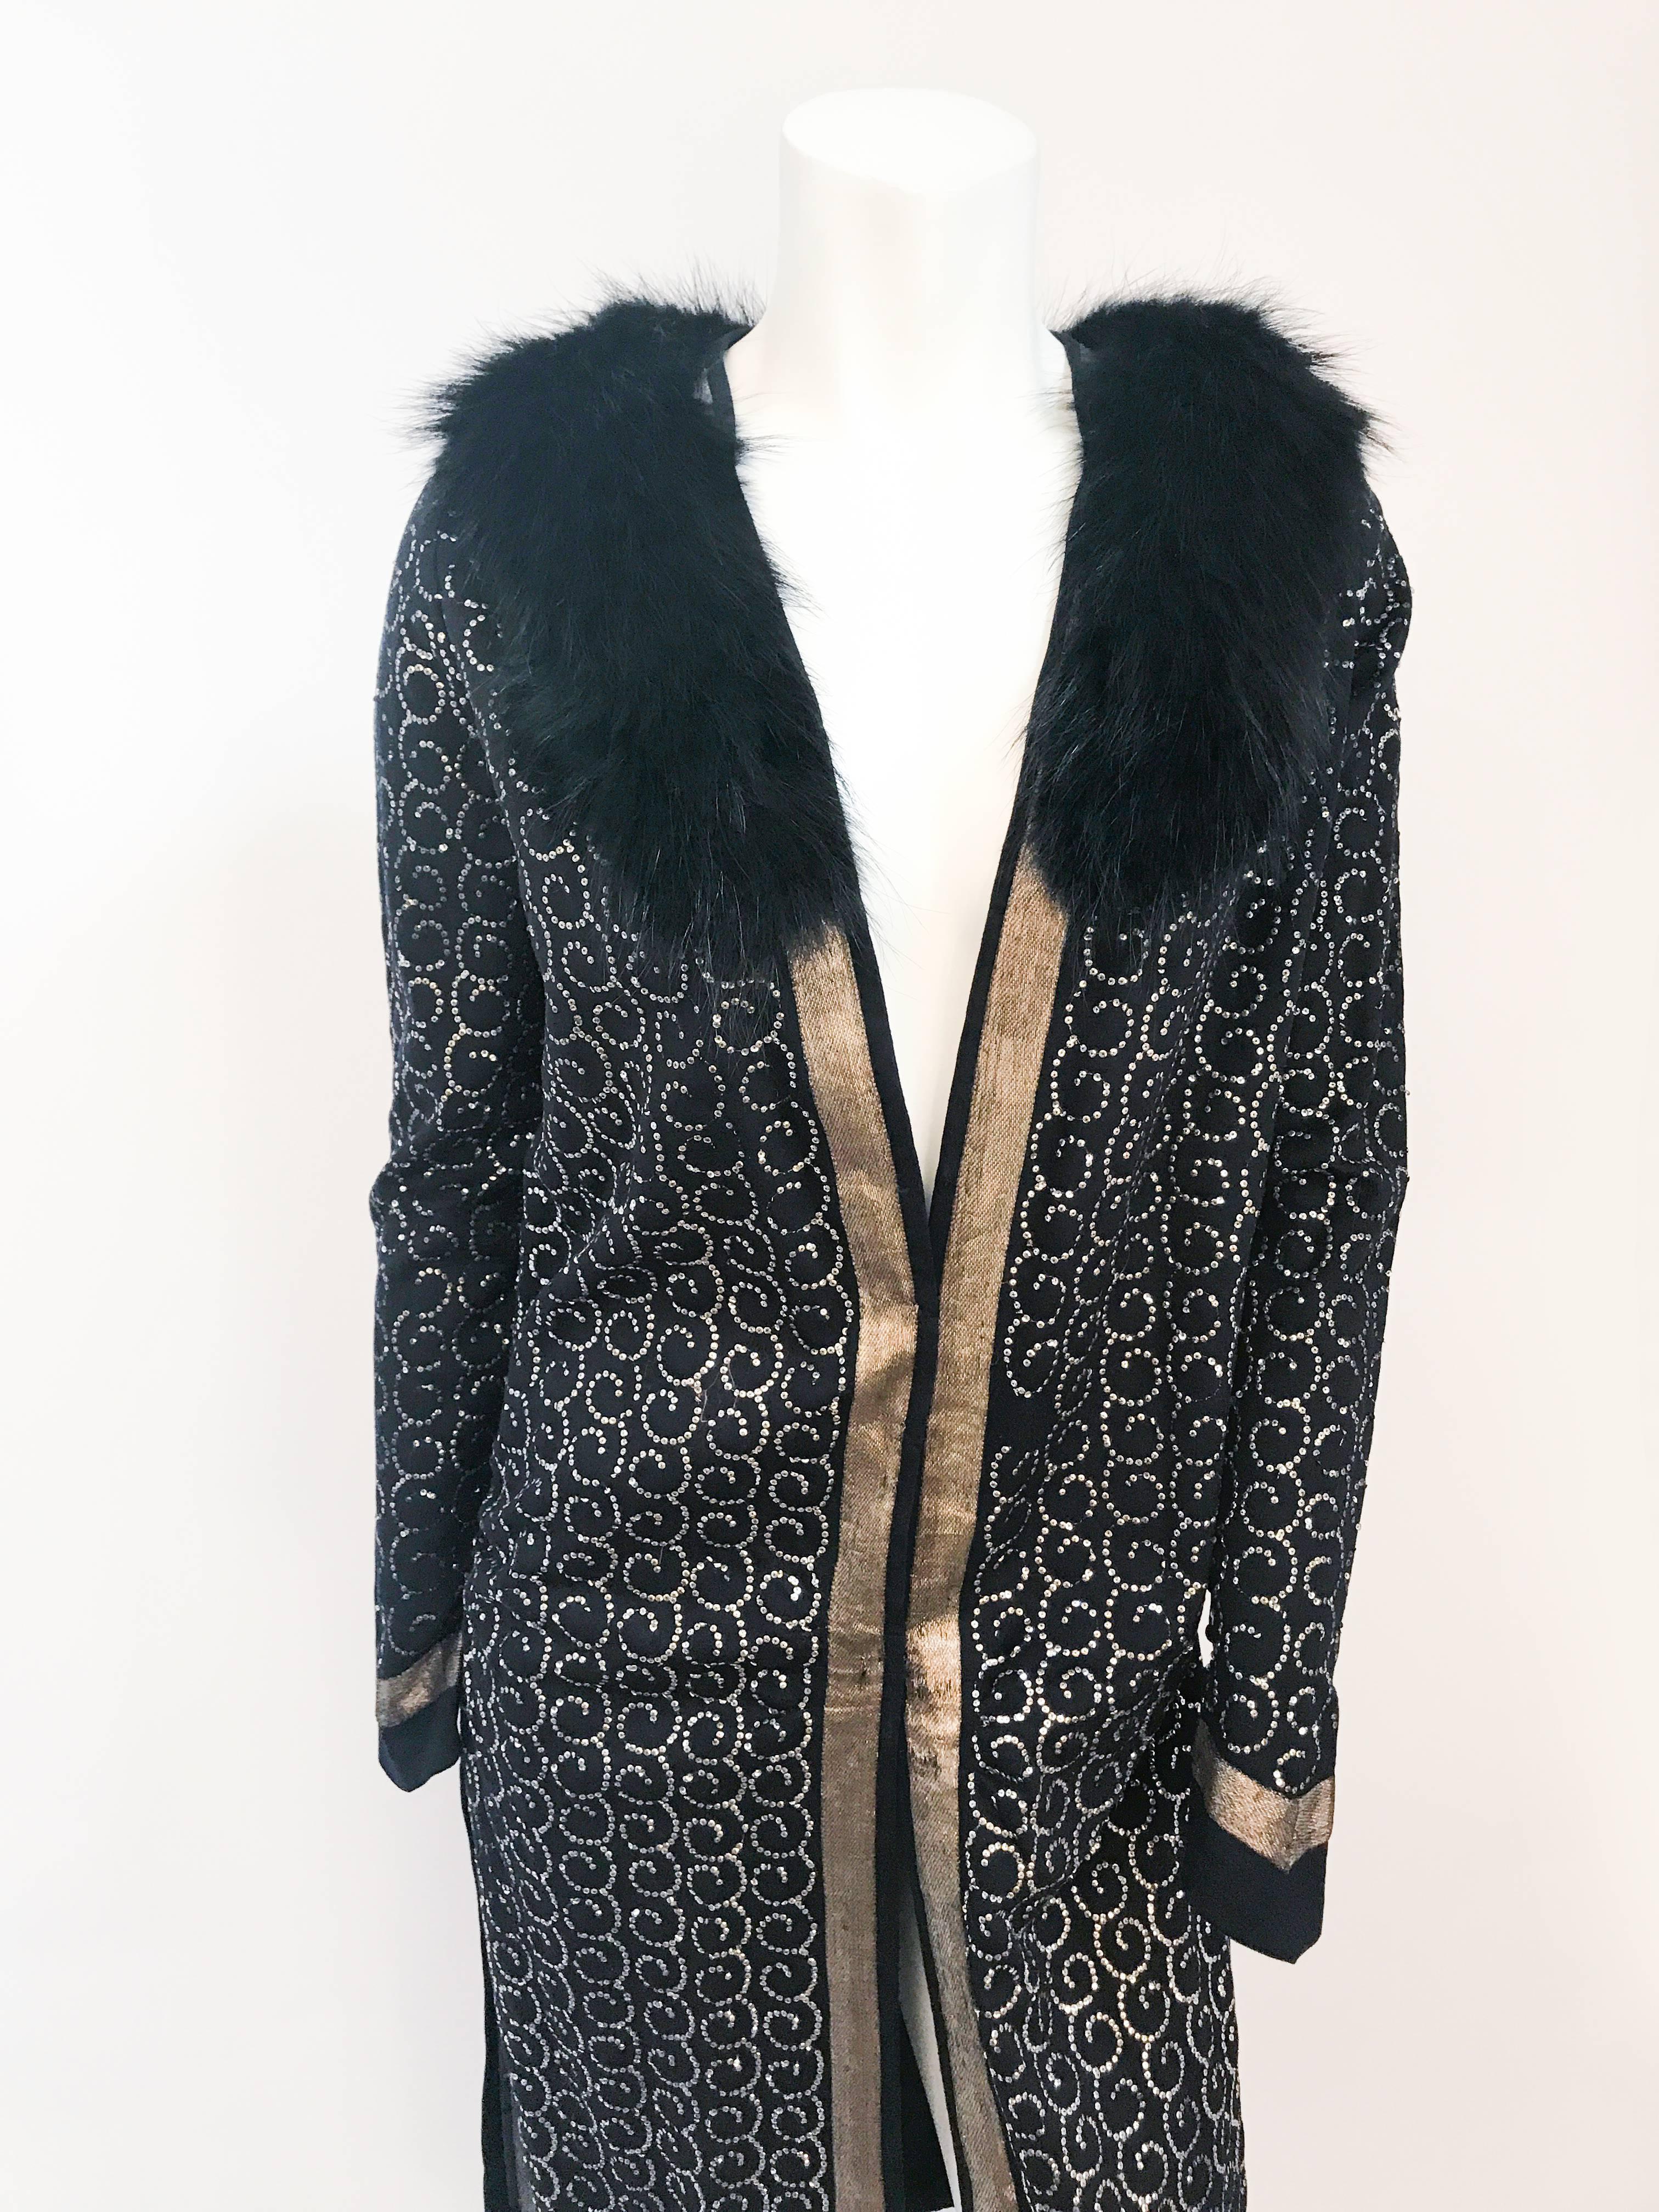 1920s Black Wool Evening Coat with Silver Sequins. Black wool gaberdine evening coat adorned with micro silver sequins. Gold Lamé trim at wrists and entire hem. Black fox fur collar and small covered button closed pointed wrists. Unlined.